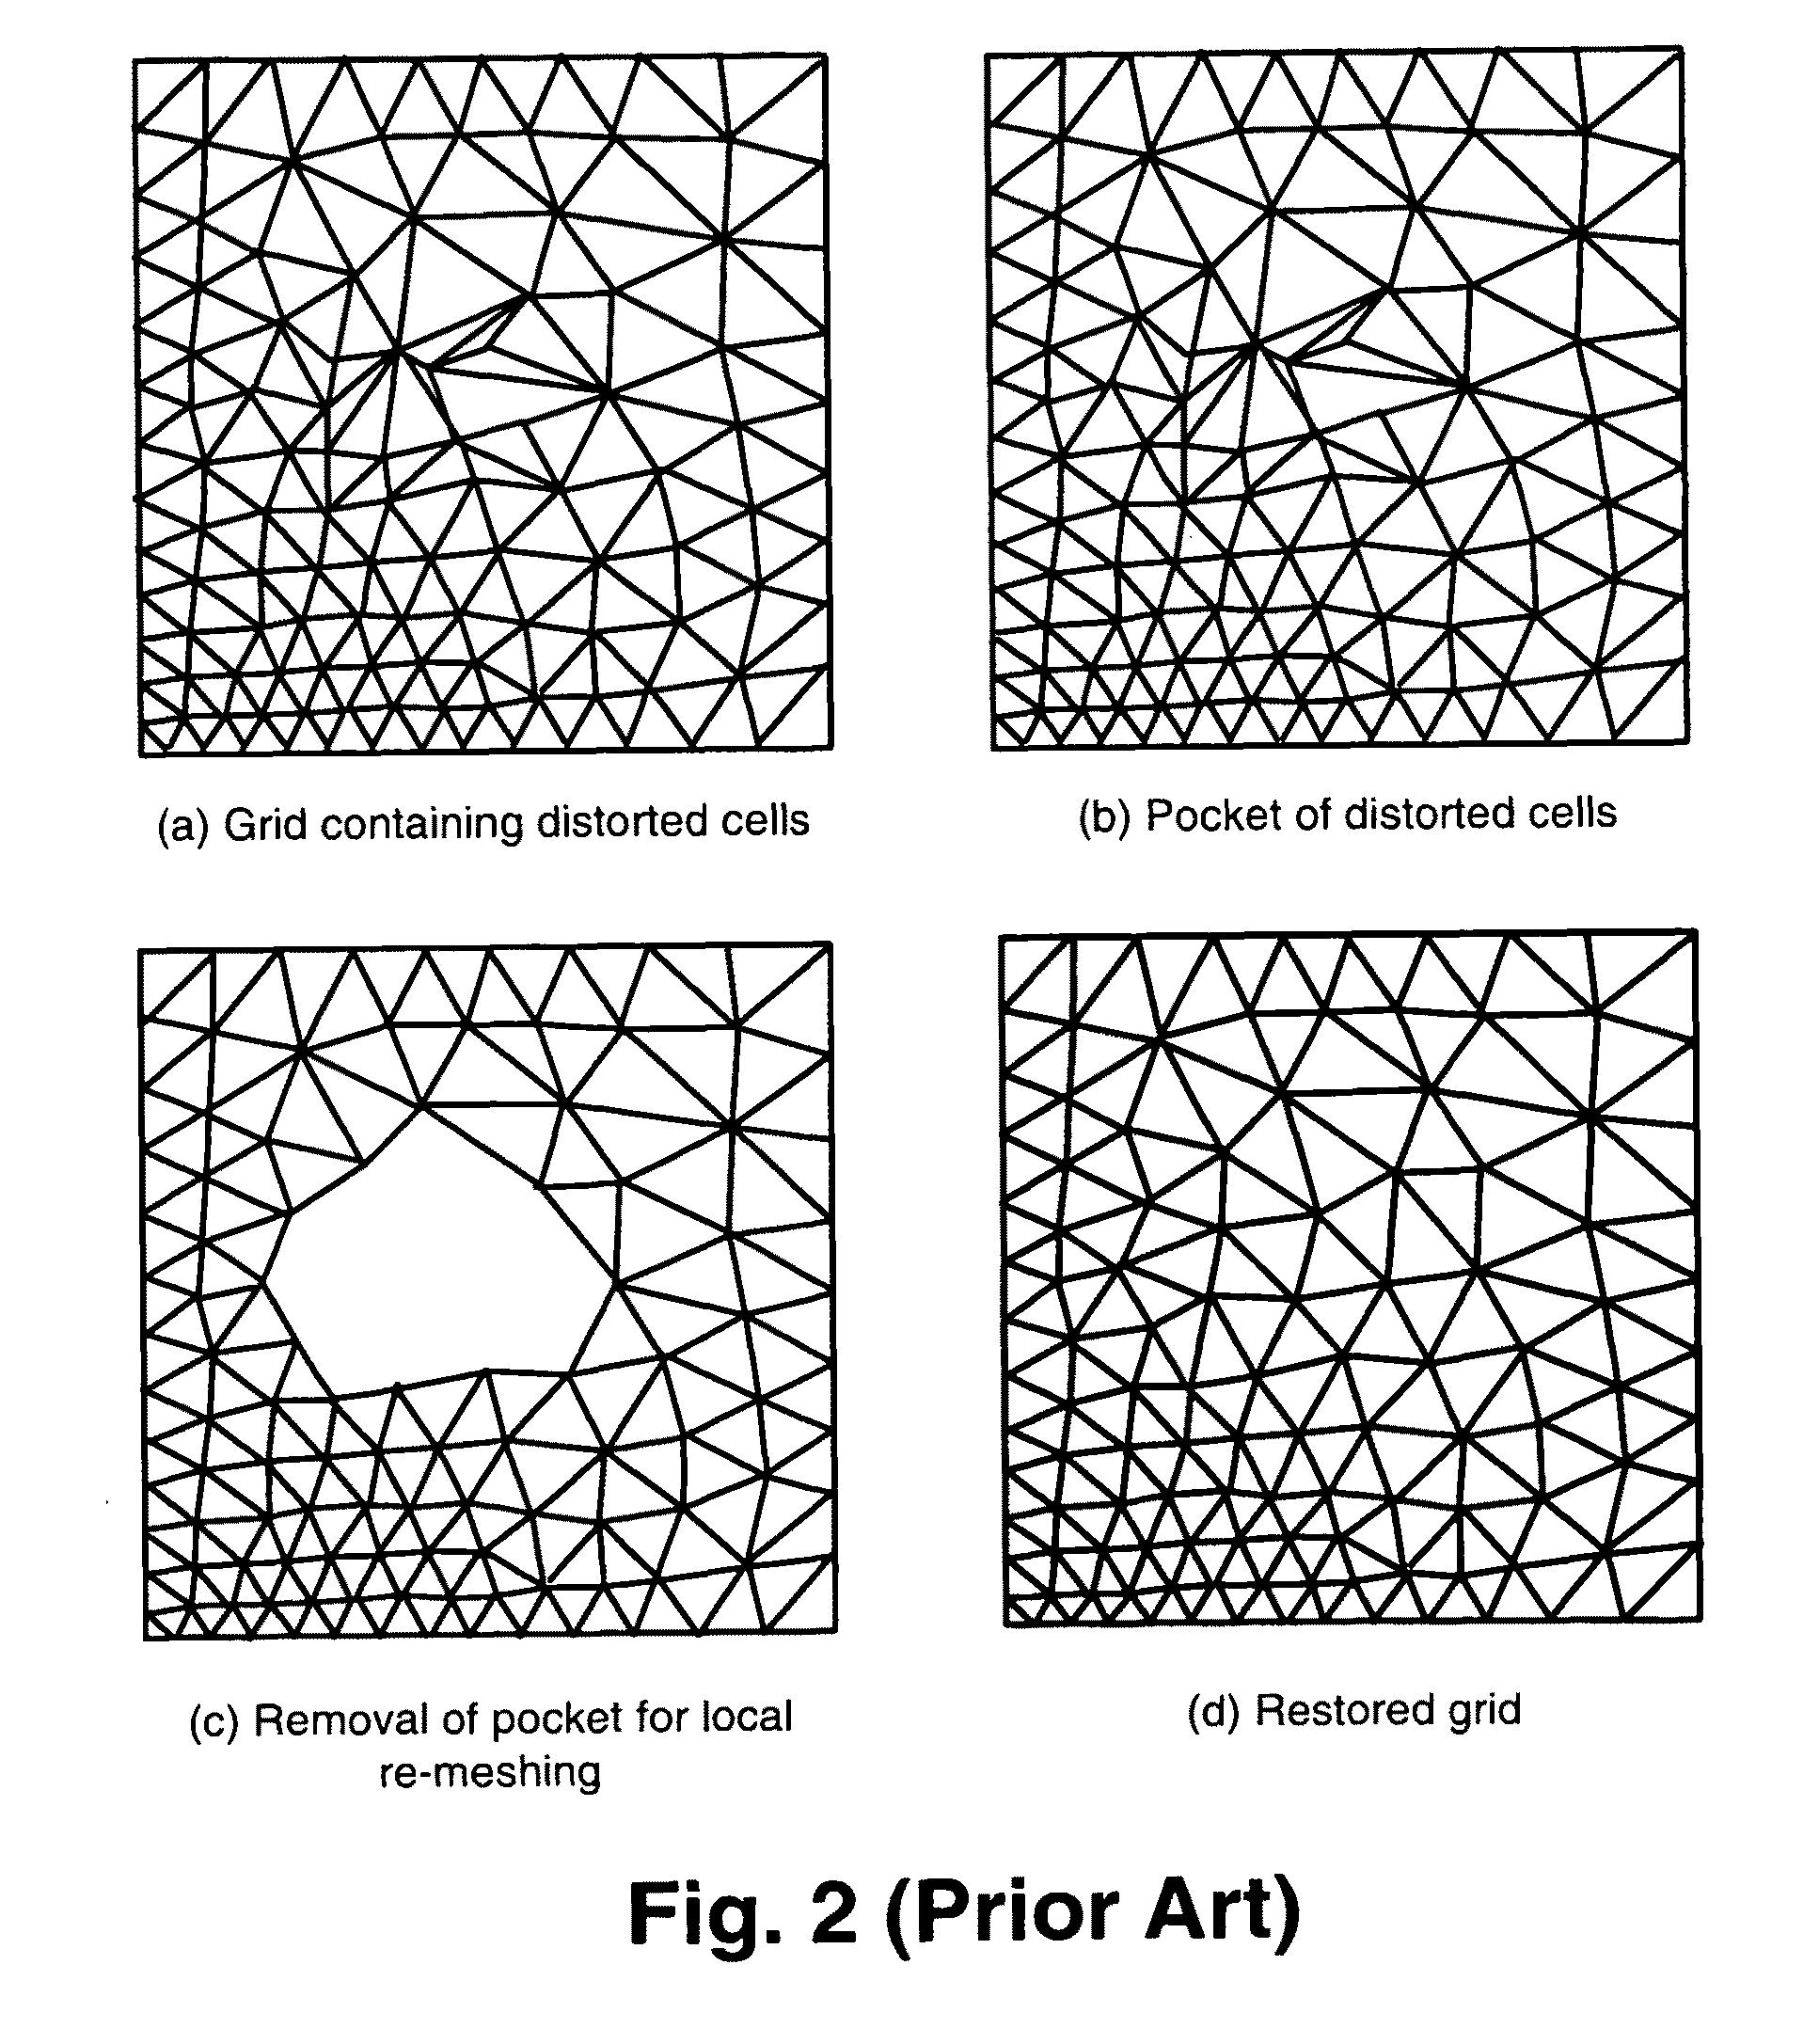 Domain decomposition by the advancing-partition method for parallel unstructured grid generation